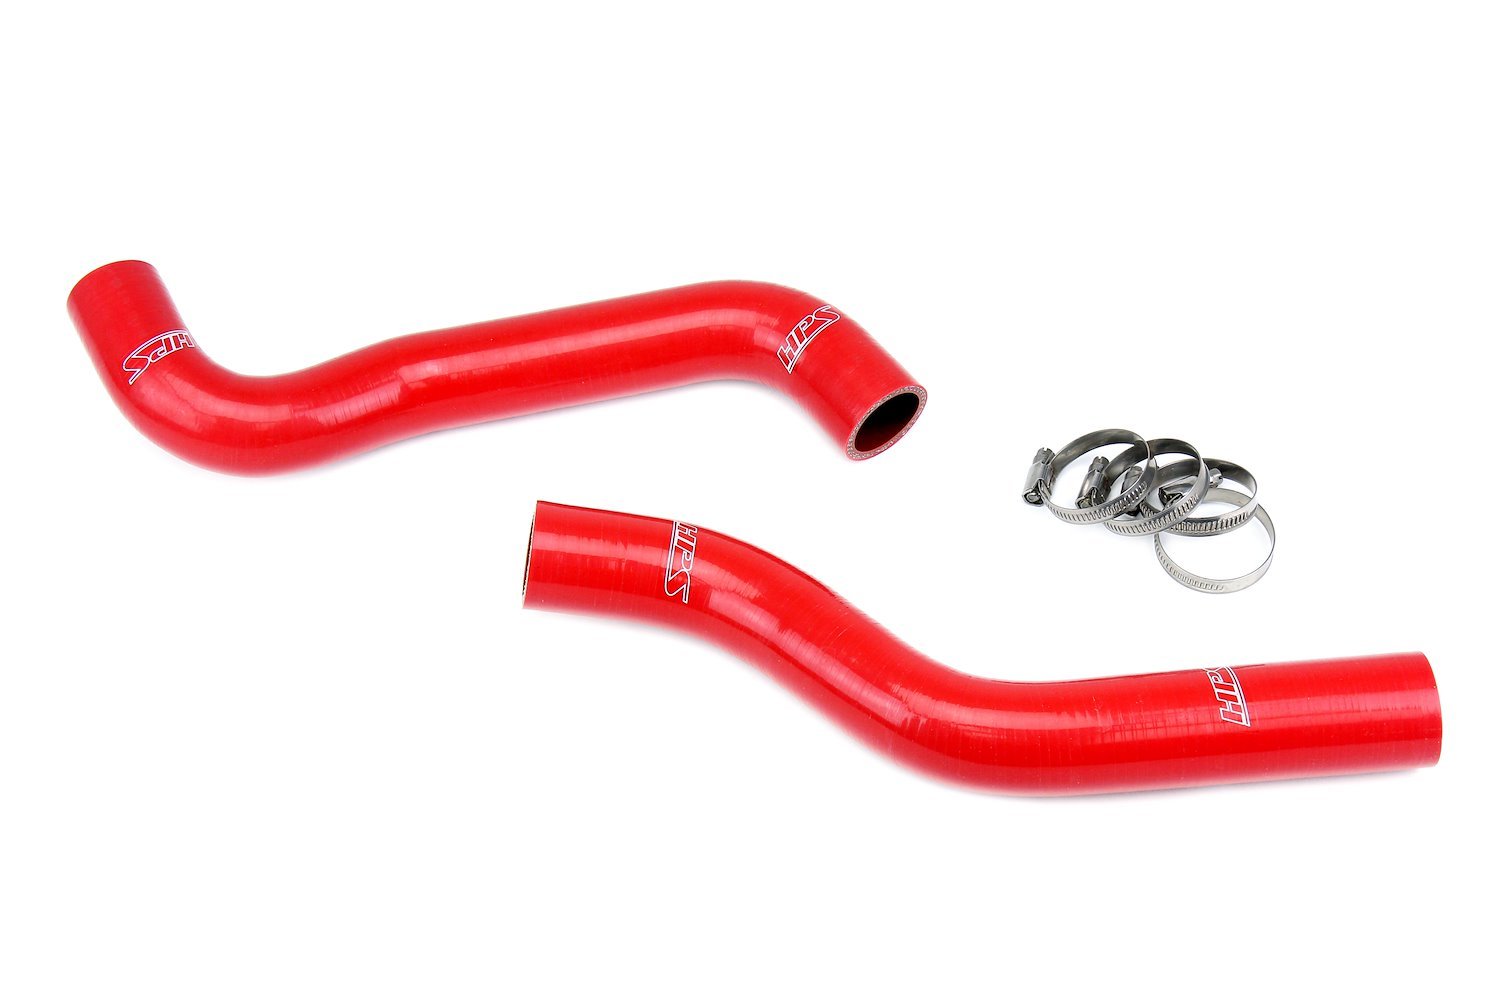 57-1887-RED Radiator Hose Kit, 3-Ply Reinforced Silicone, Replaces Rubber Radiator Hoses